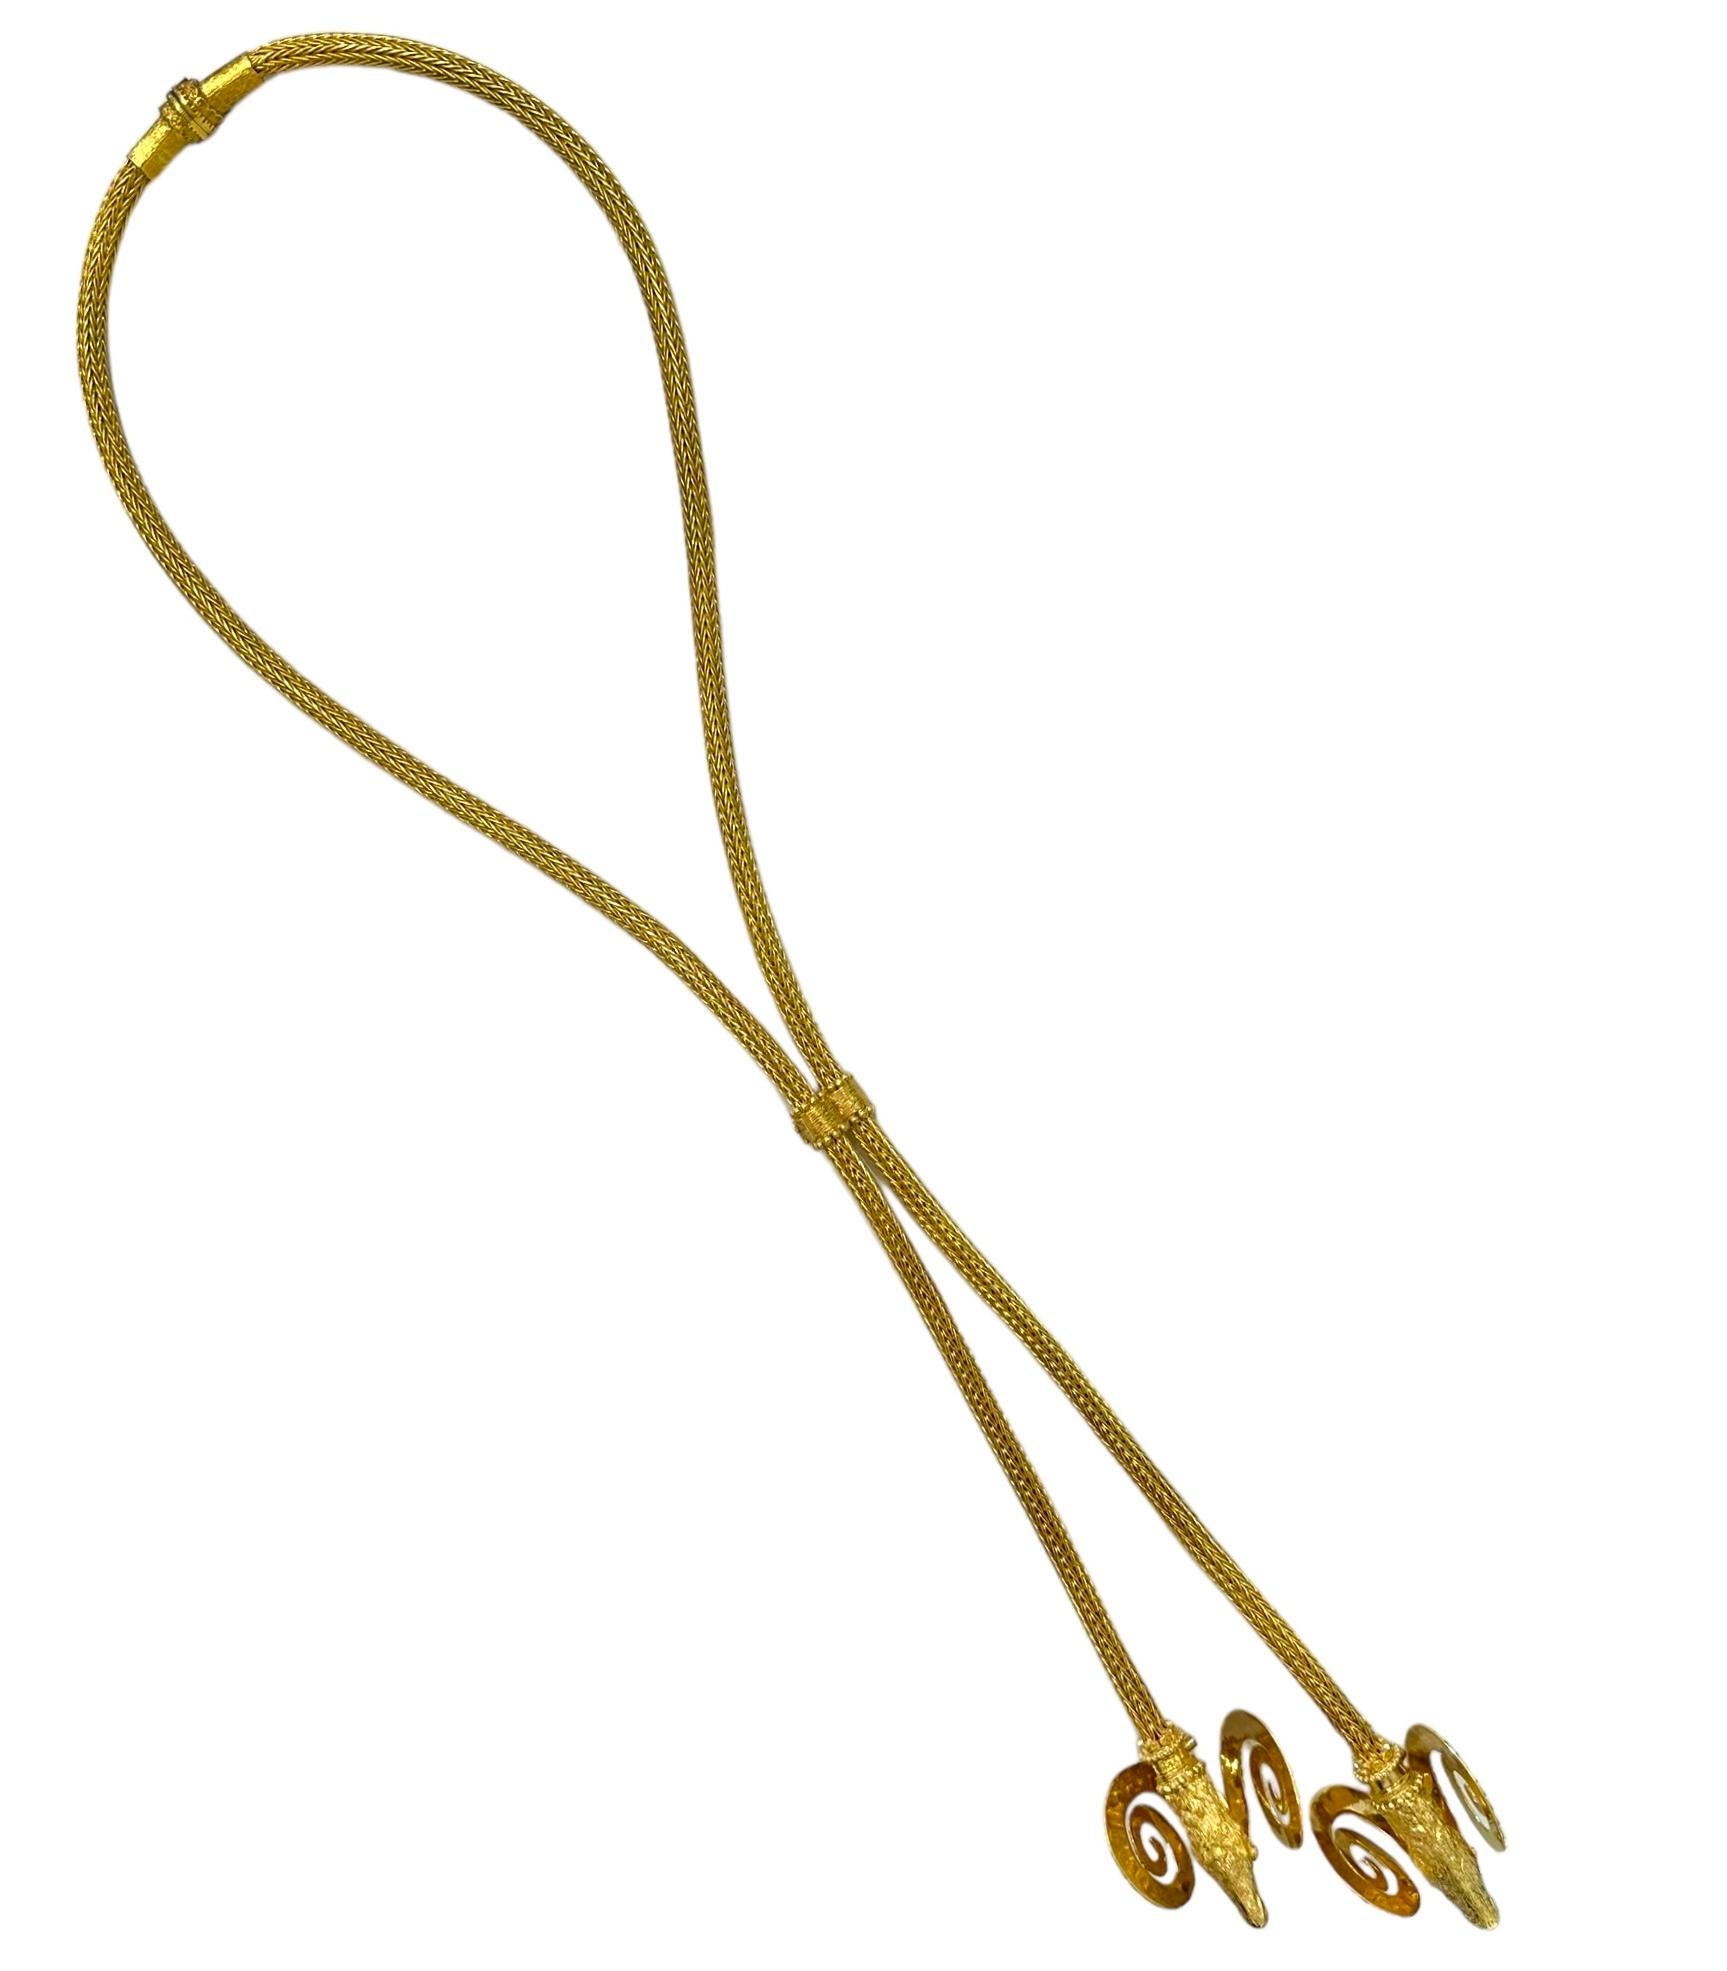 Single Cut Monumental Scale Lalaounis 18k Gold Double Rams Head Necklace 38 Inches Long For Sale